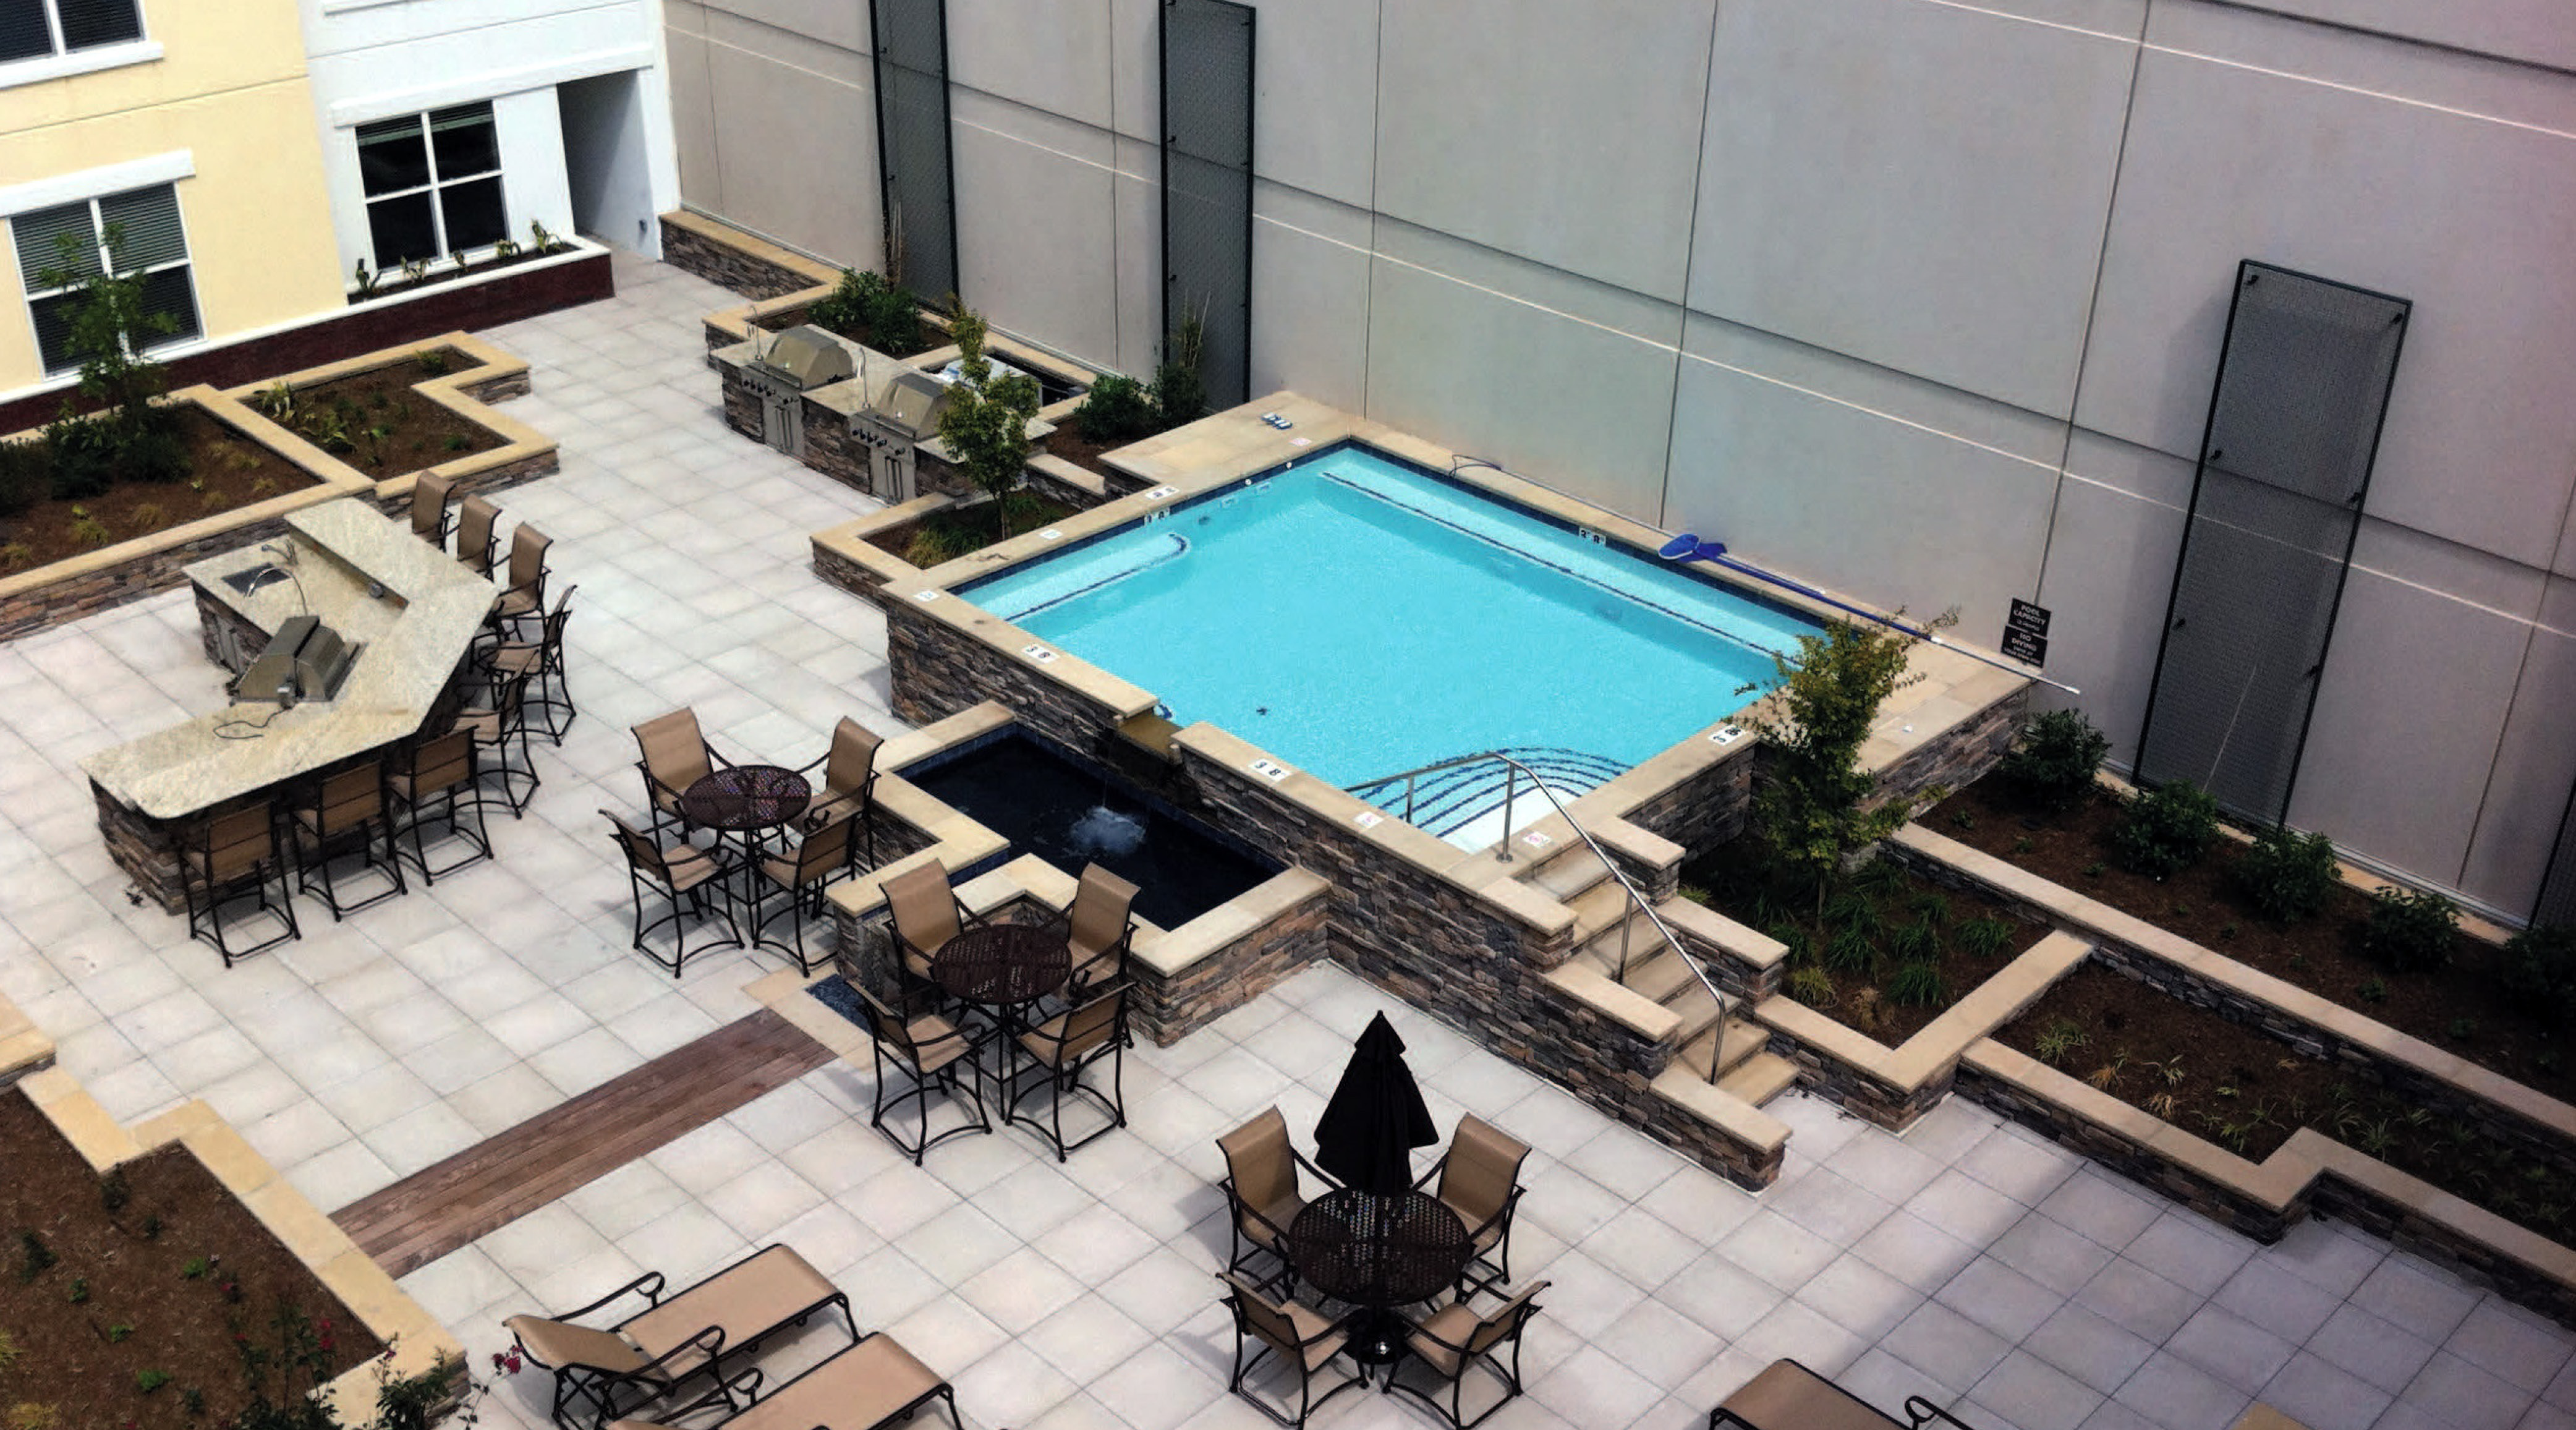 Monticello Station Apartments - Pool